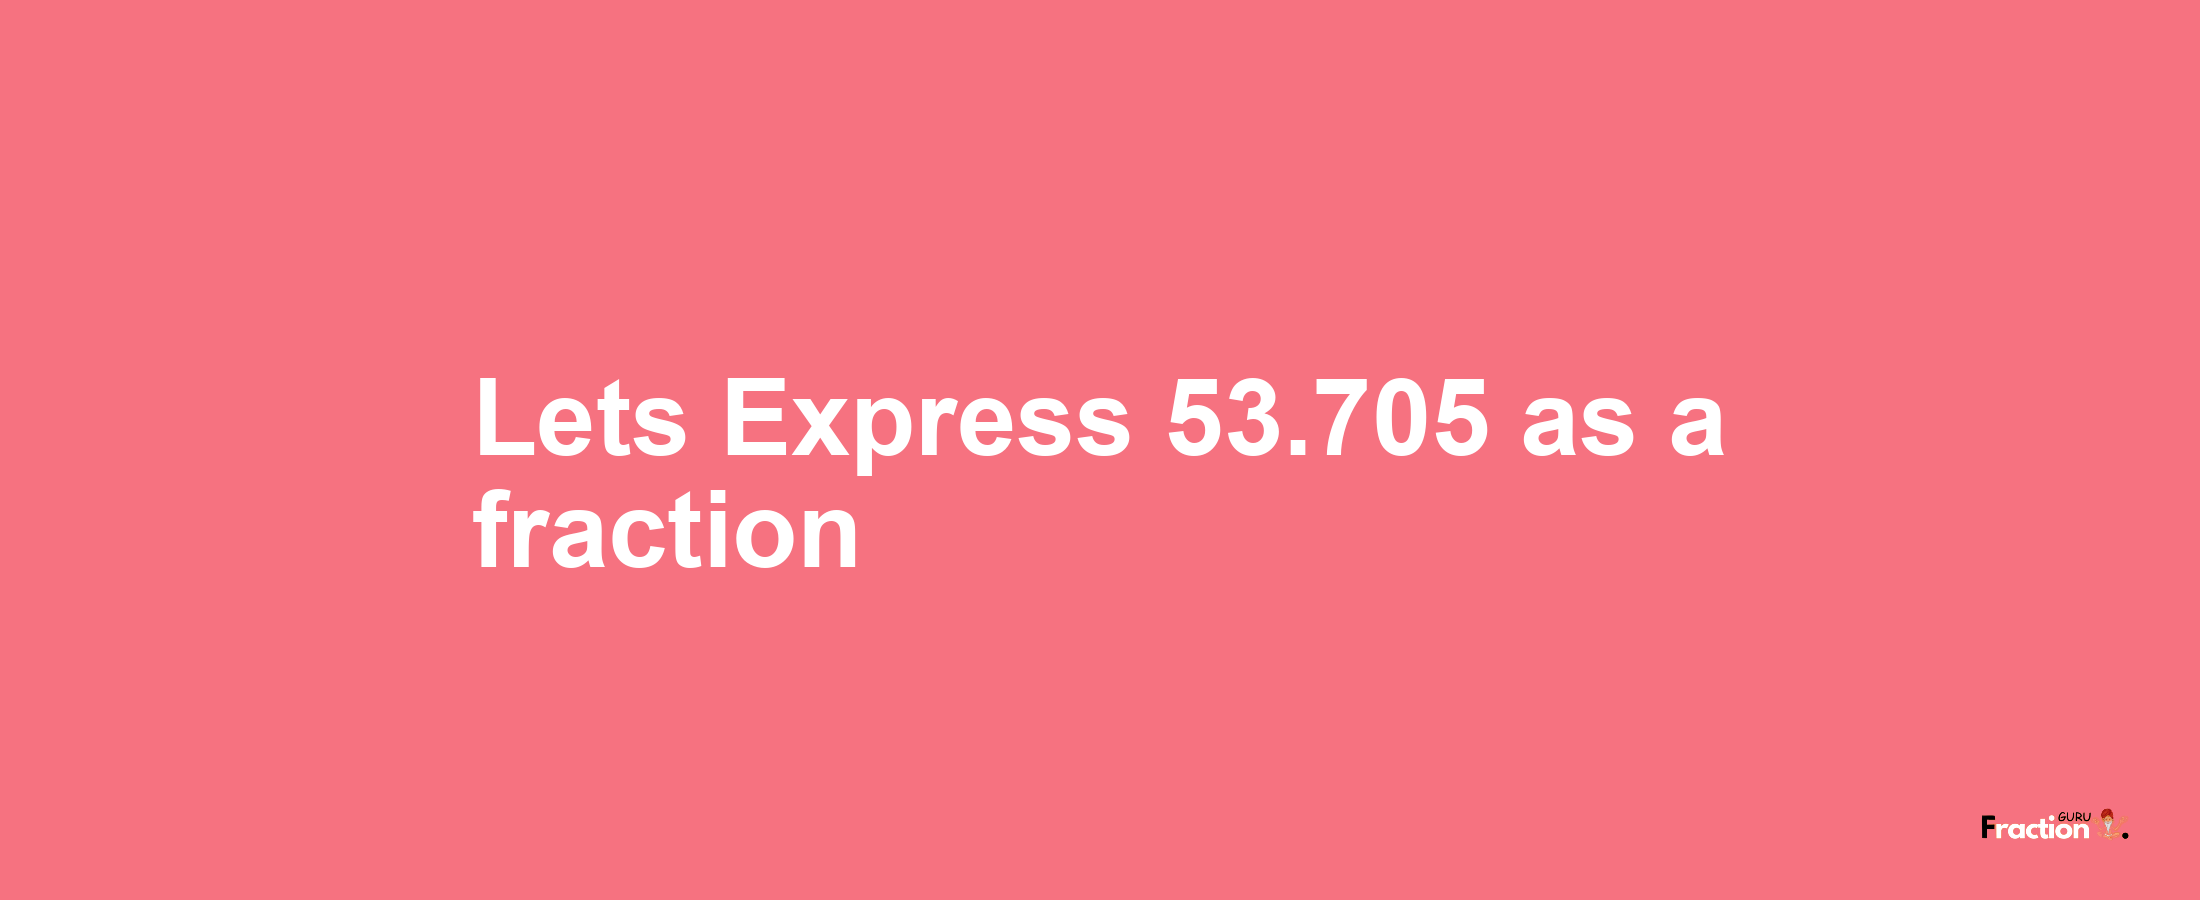 Lets Express 53.705 as afraction